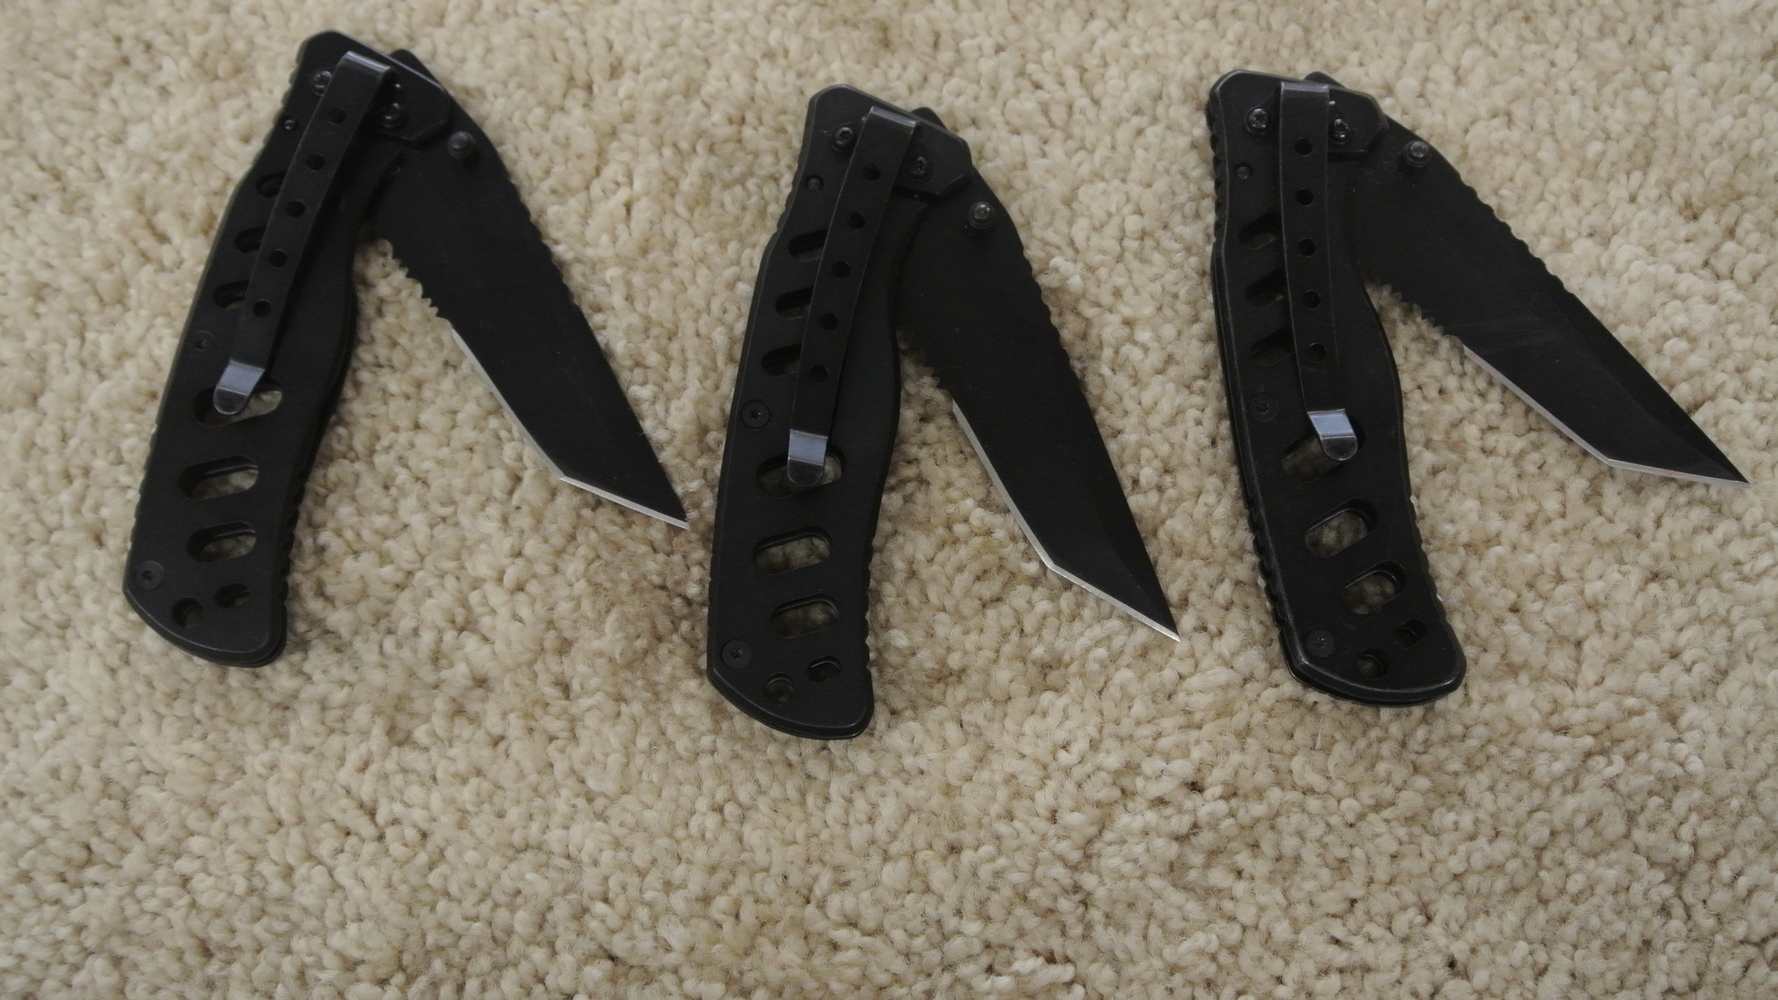 Smith and Wesson knife ExtremeOps model: SWA3, CK10HBS